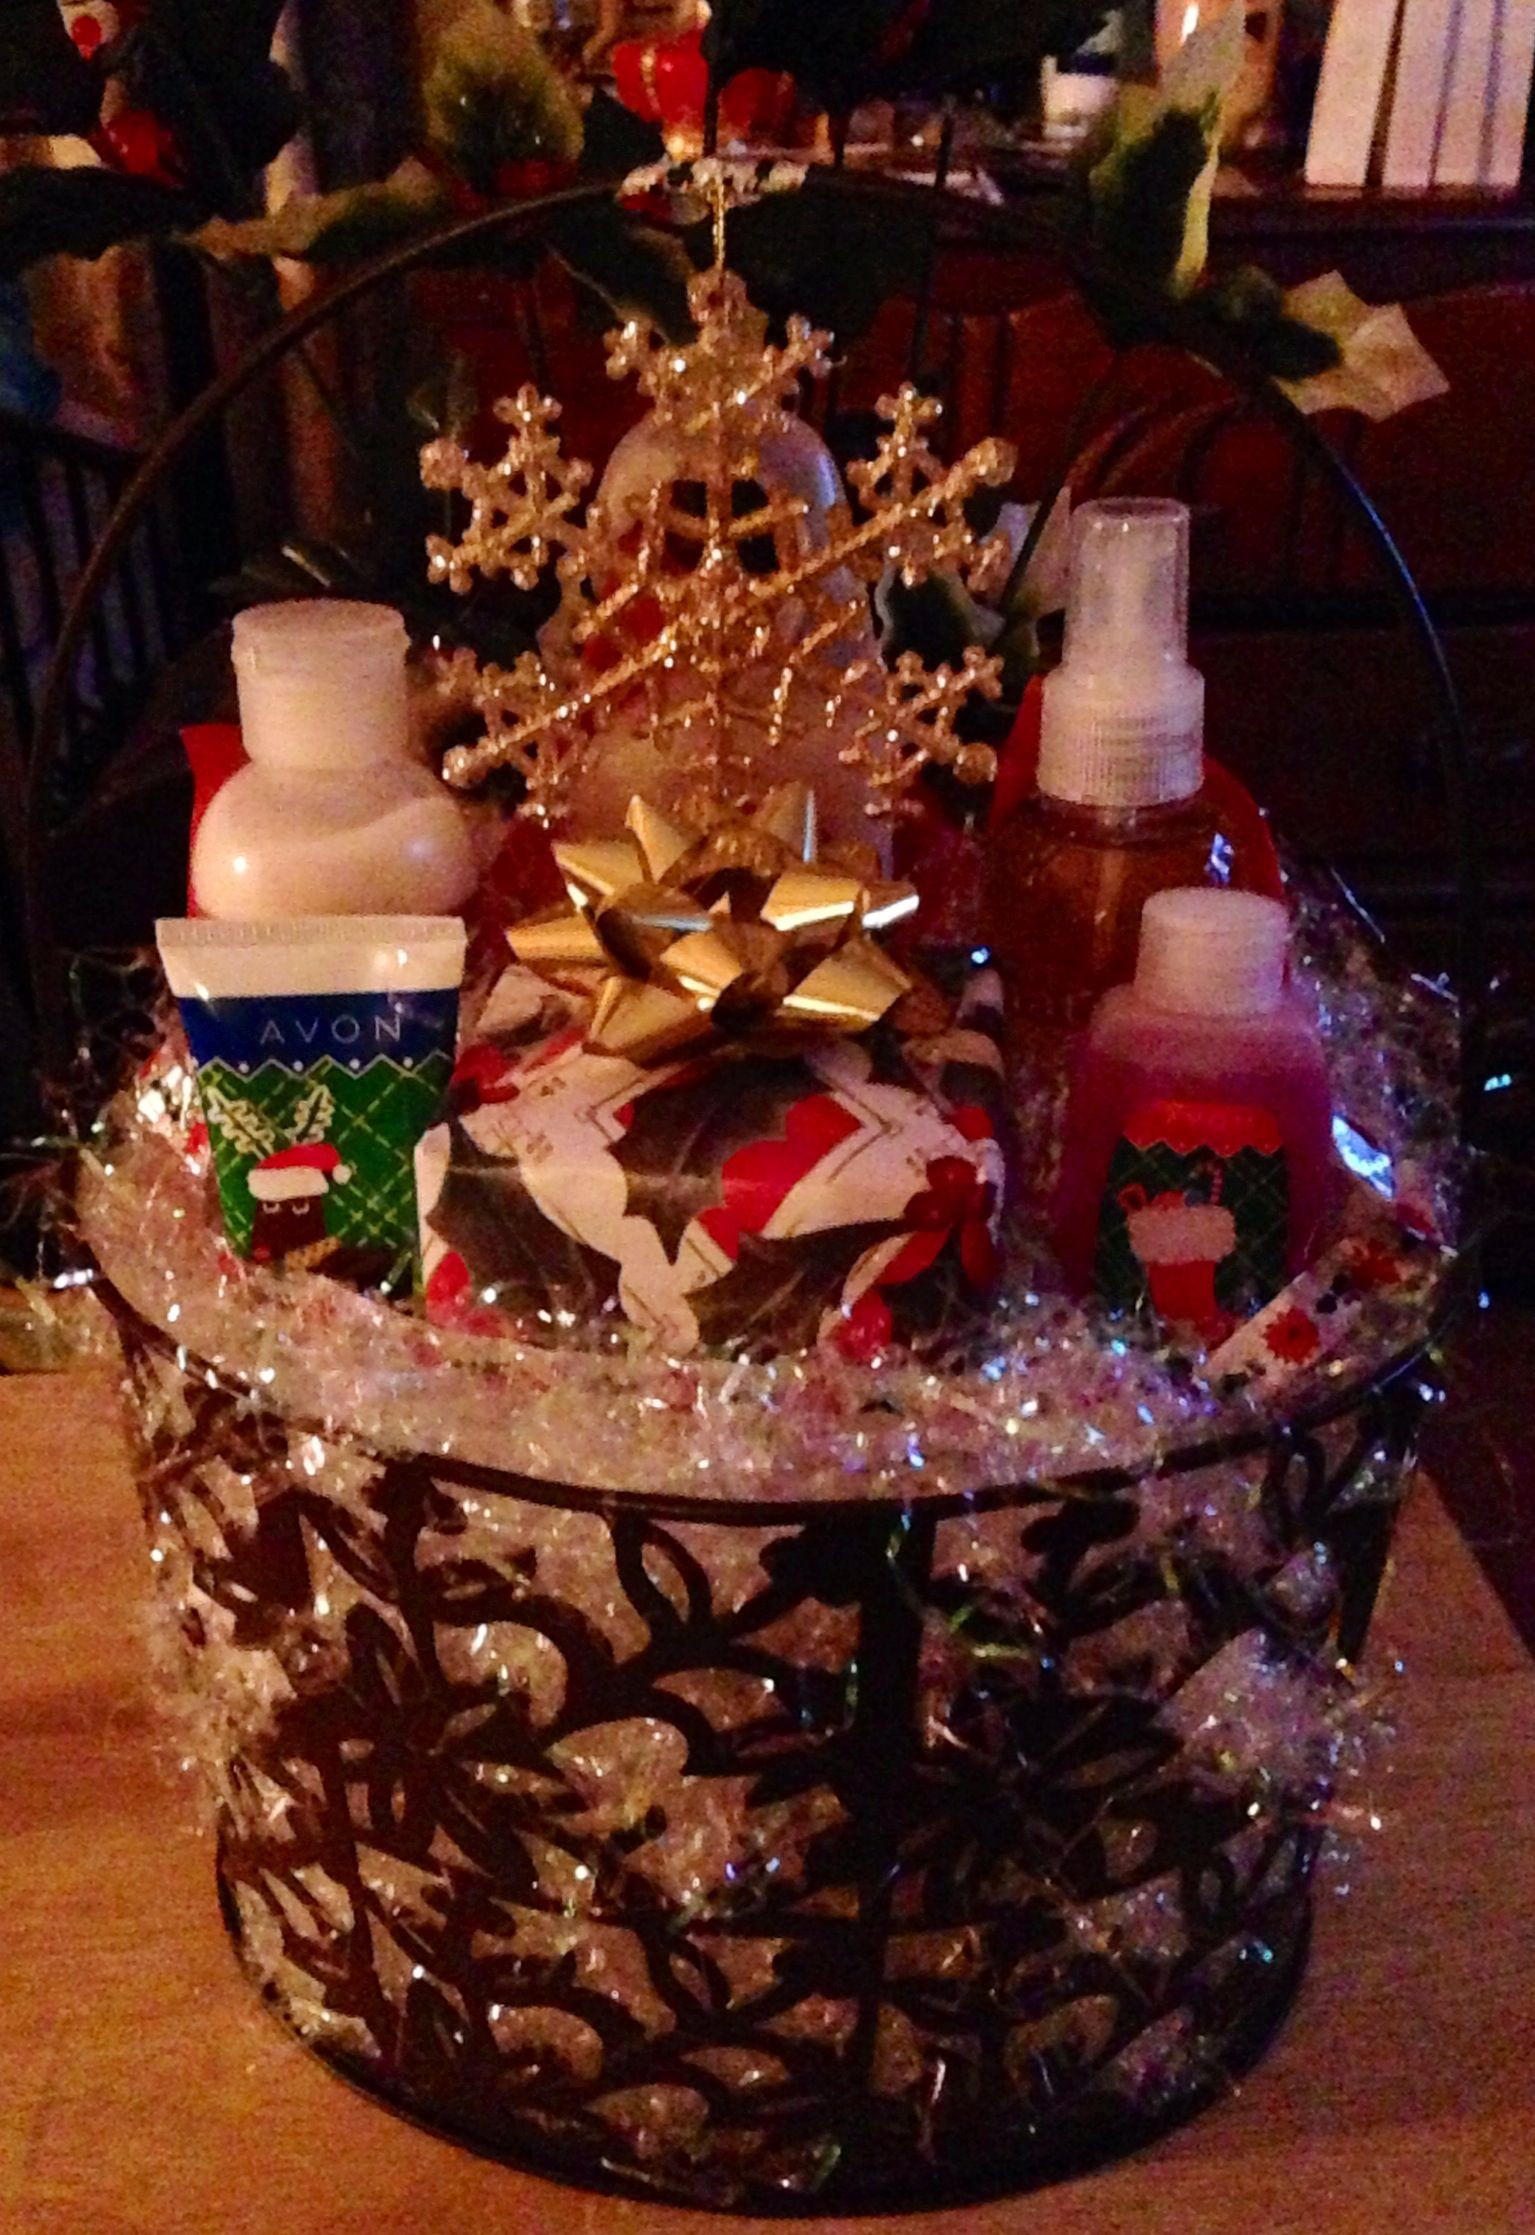 Avon Gift Basket Ideas
 The Avon t baskets are ing along nicely